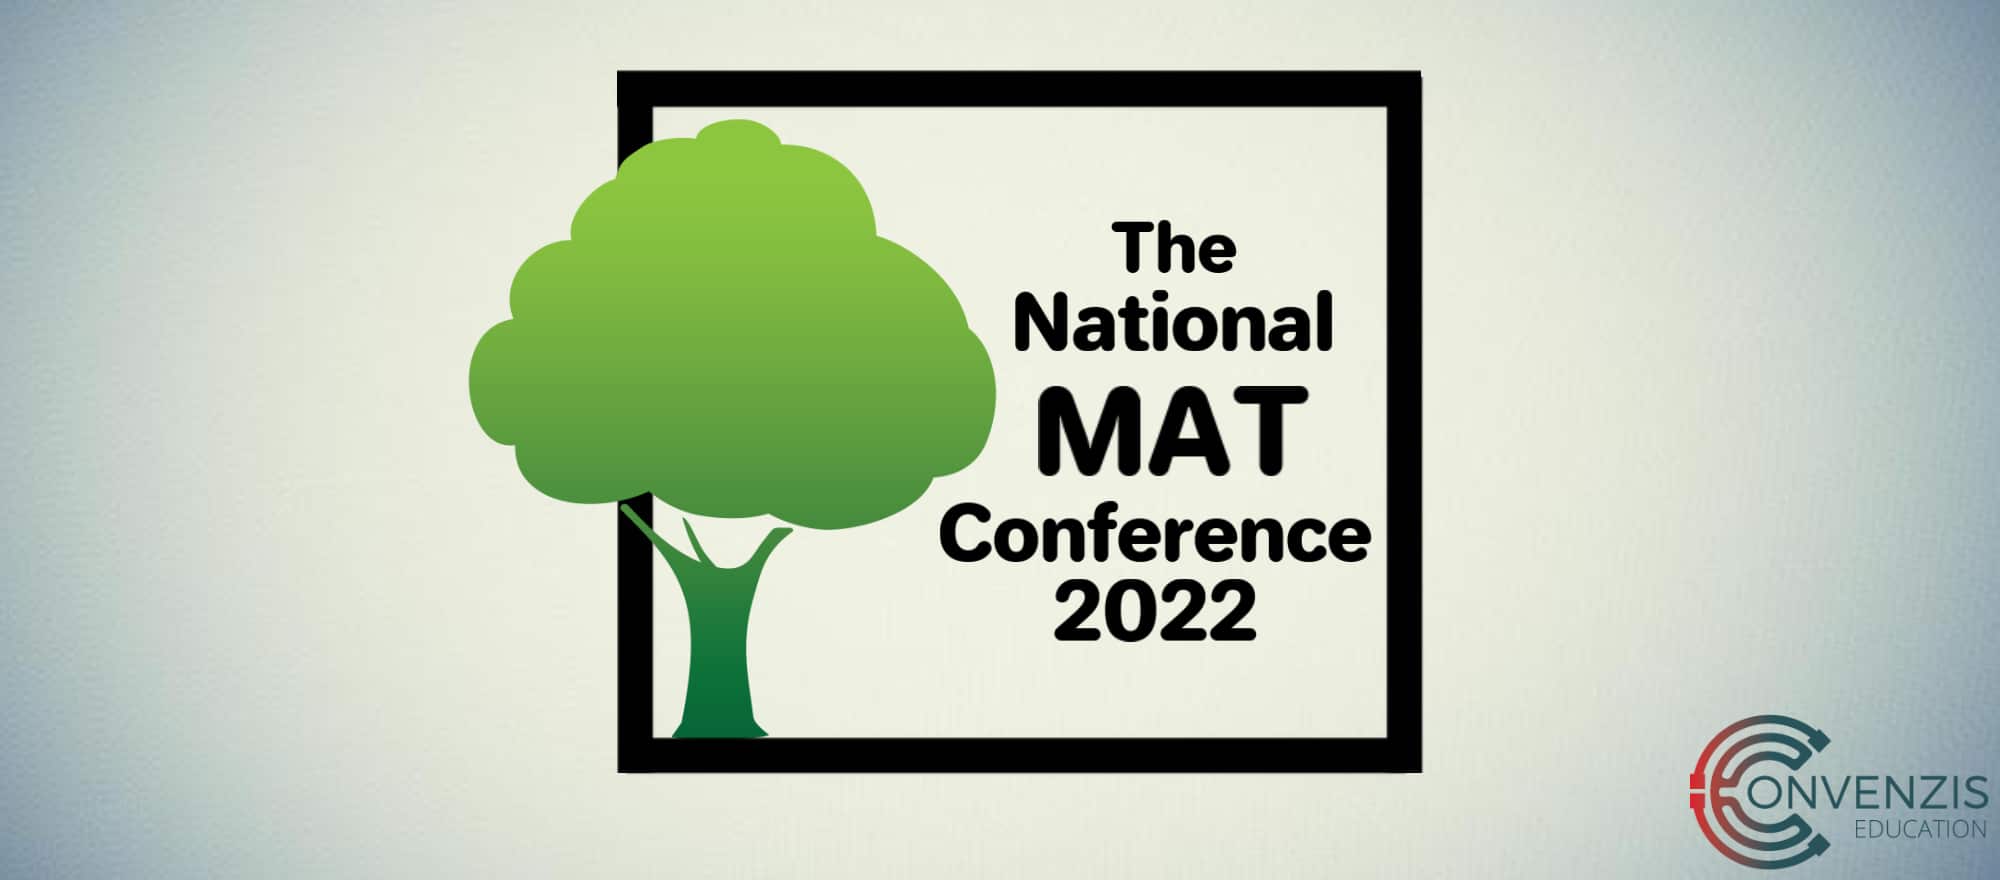 The National MAT Conference 2022 IRIS